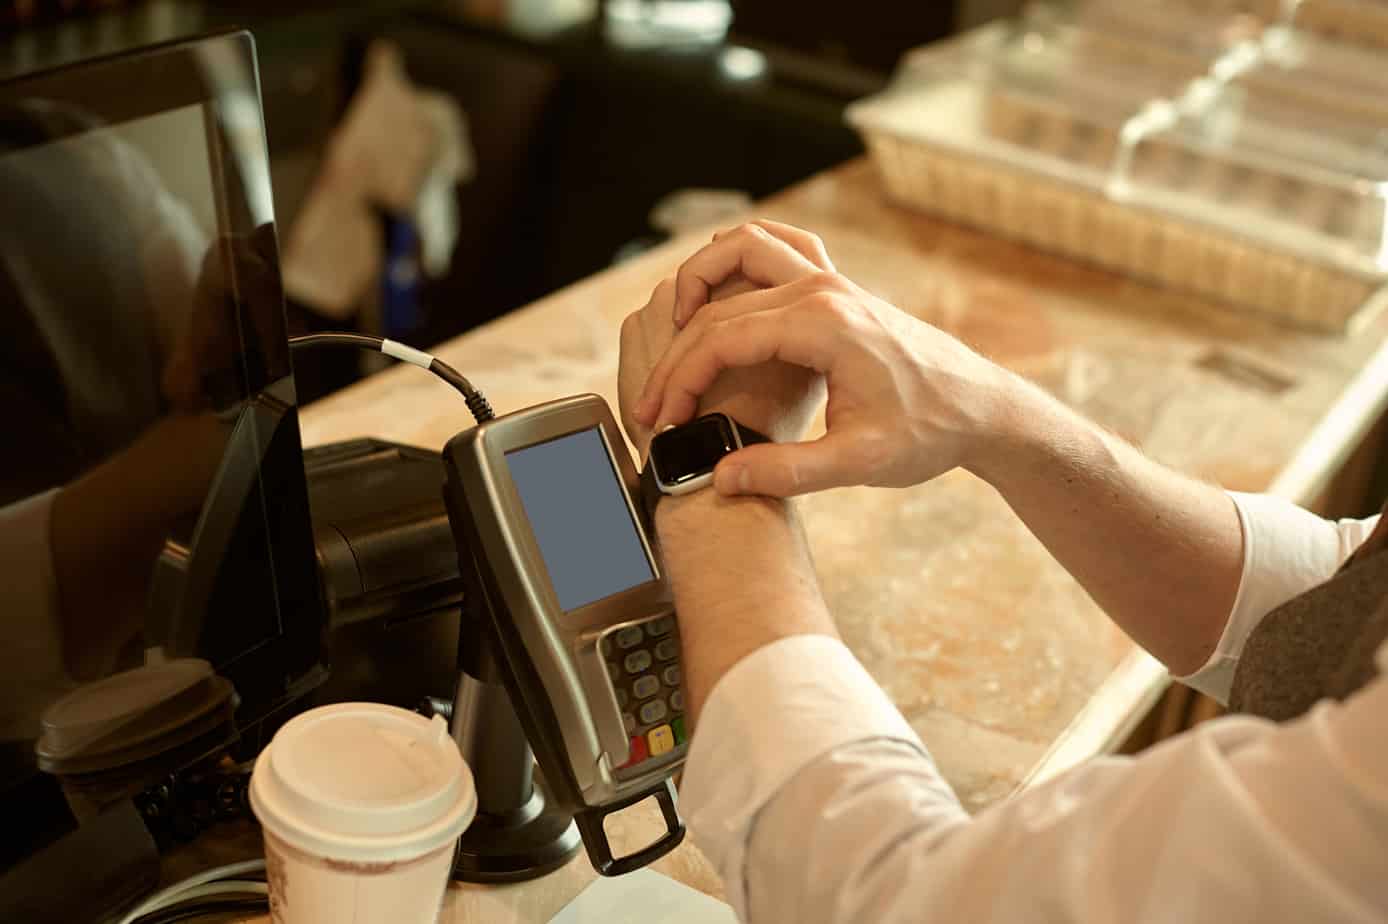 man using smart watch to pay in restaurant nfc contactless convenient payment service 215885687